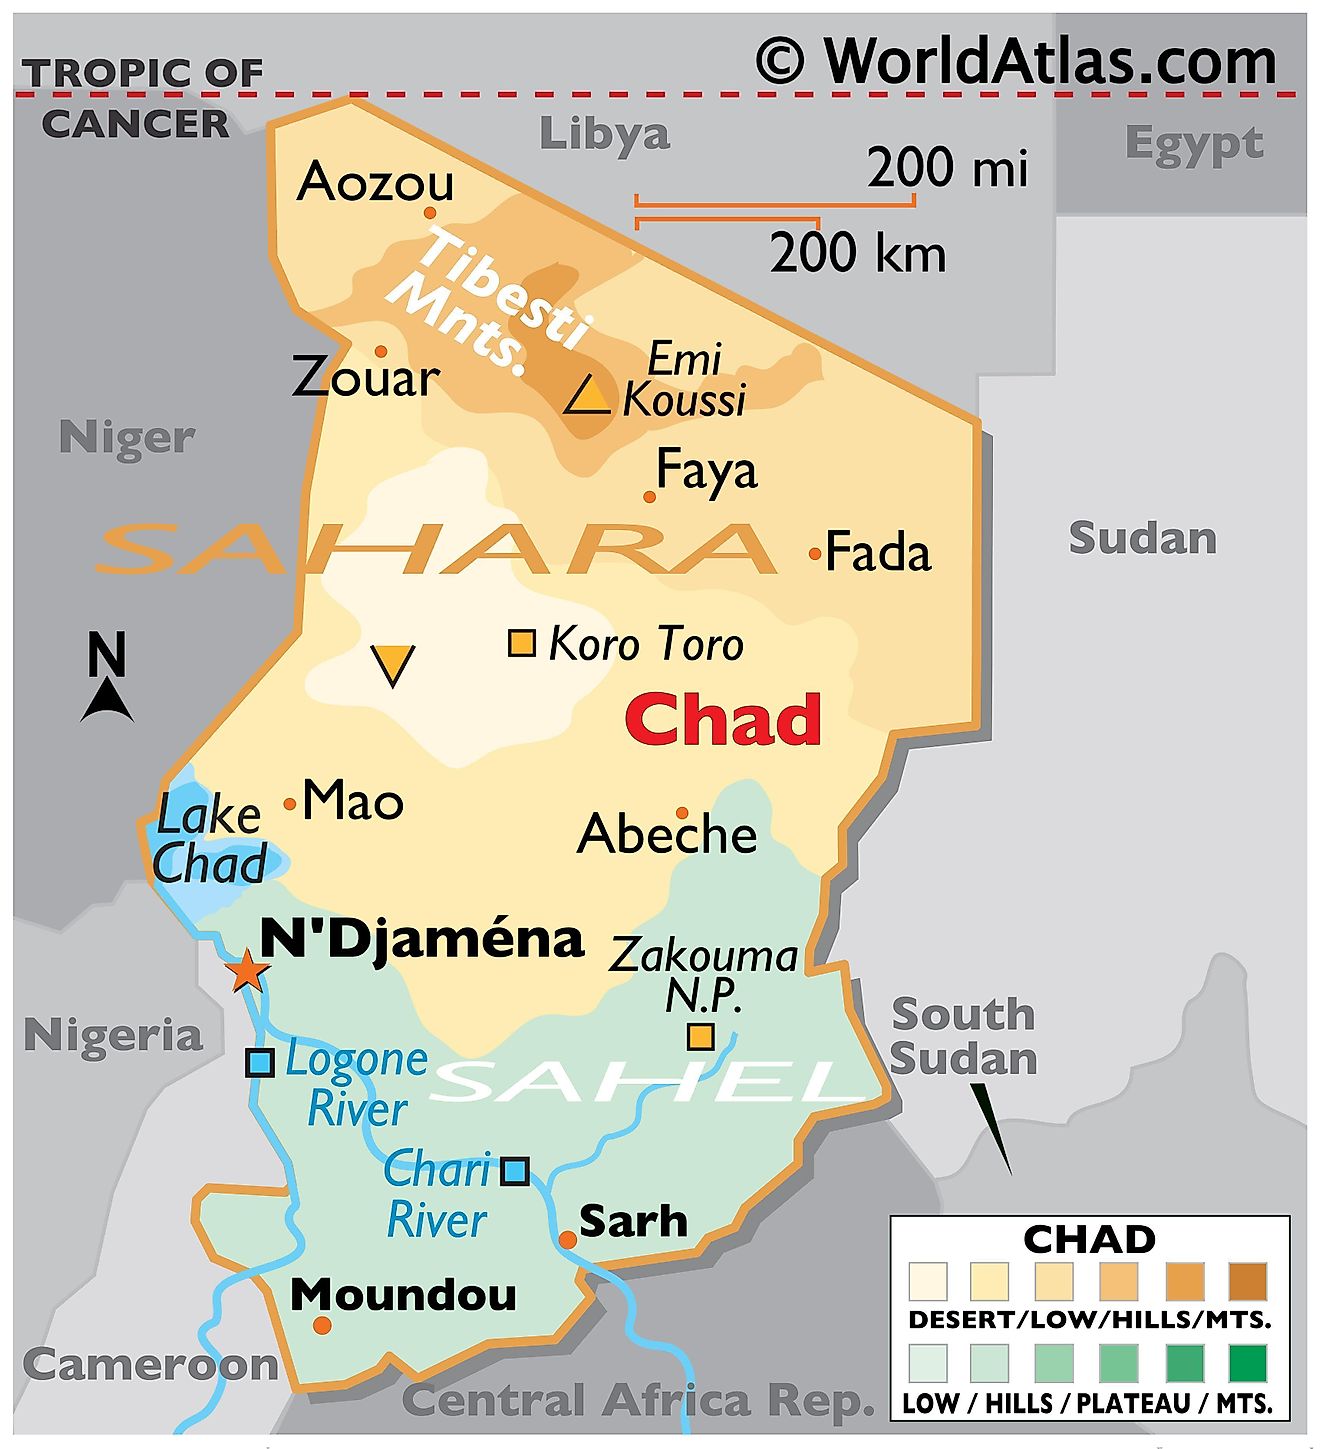 Physical Map of Chad with state boundaries, relief, major rivers, Lake Chad, mountain ranges, and important cities.